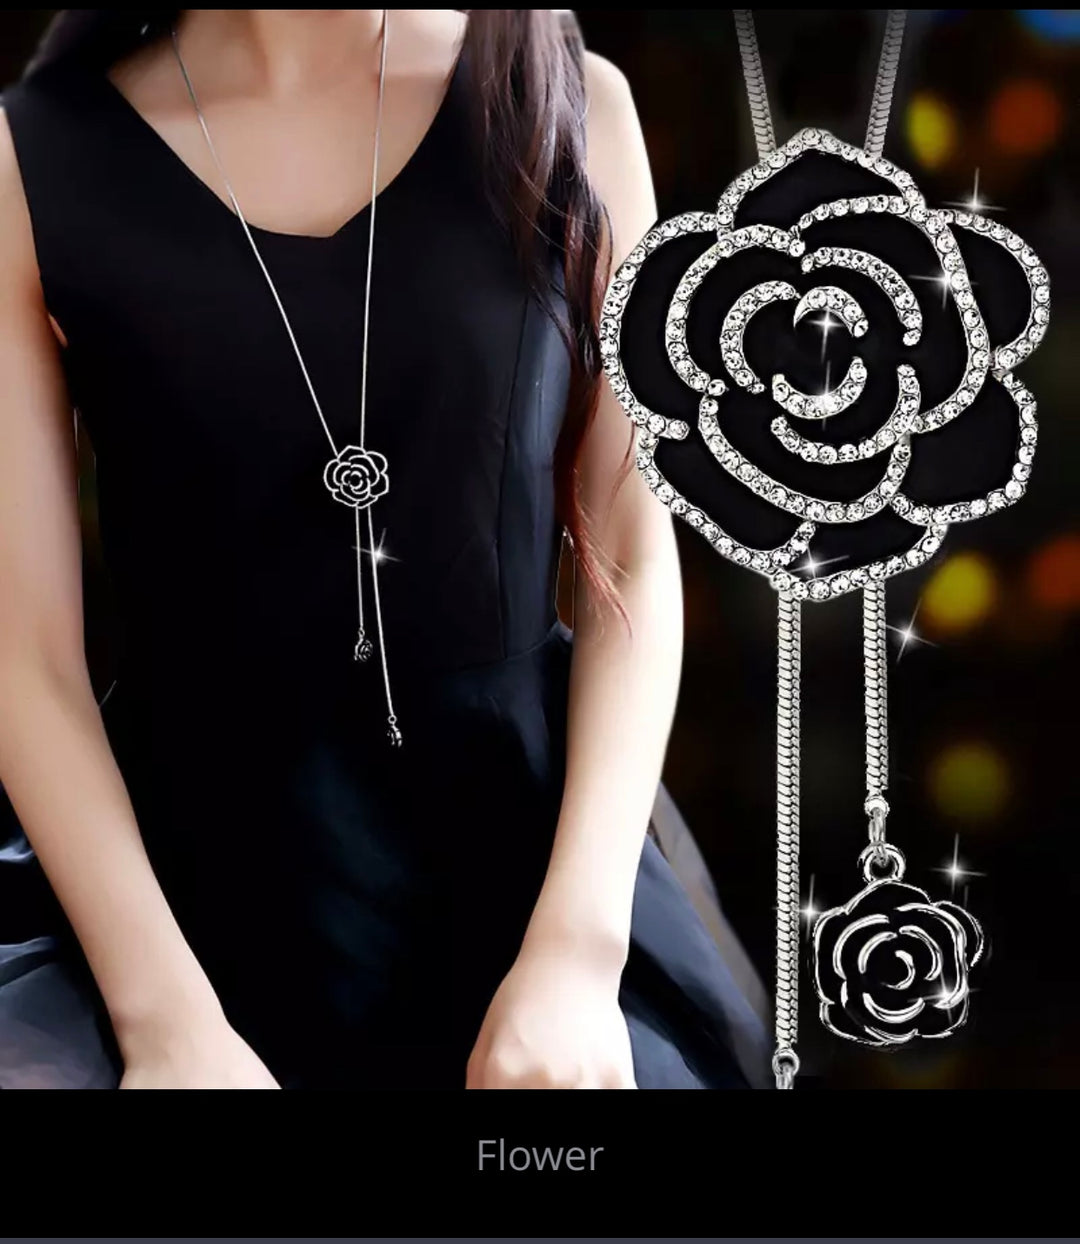 Long Flowers necklace